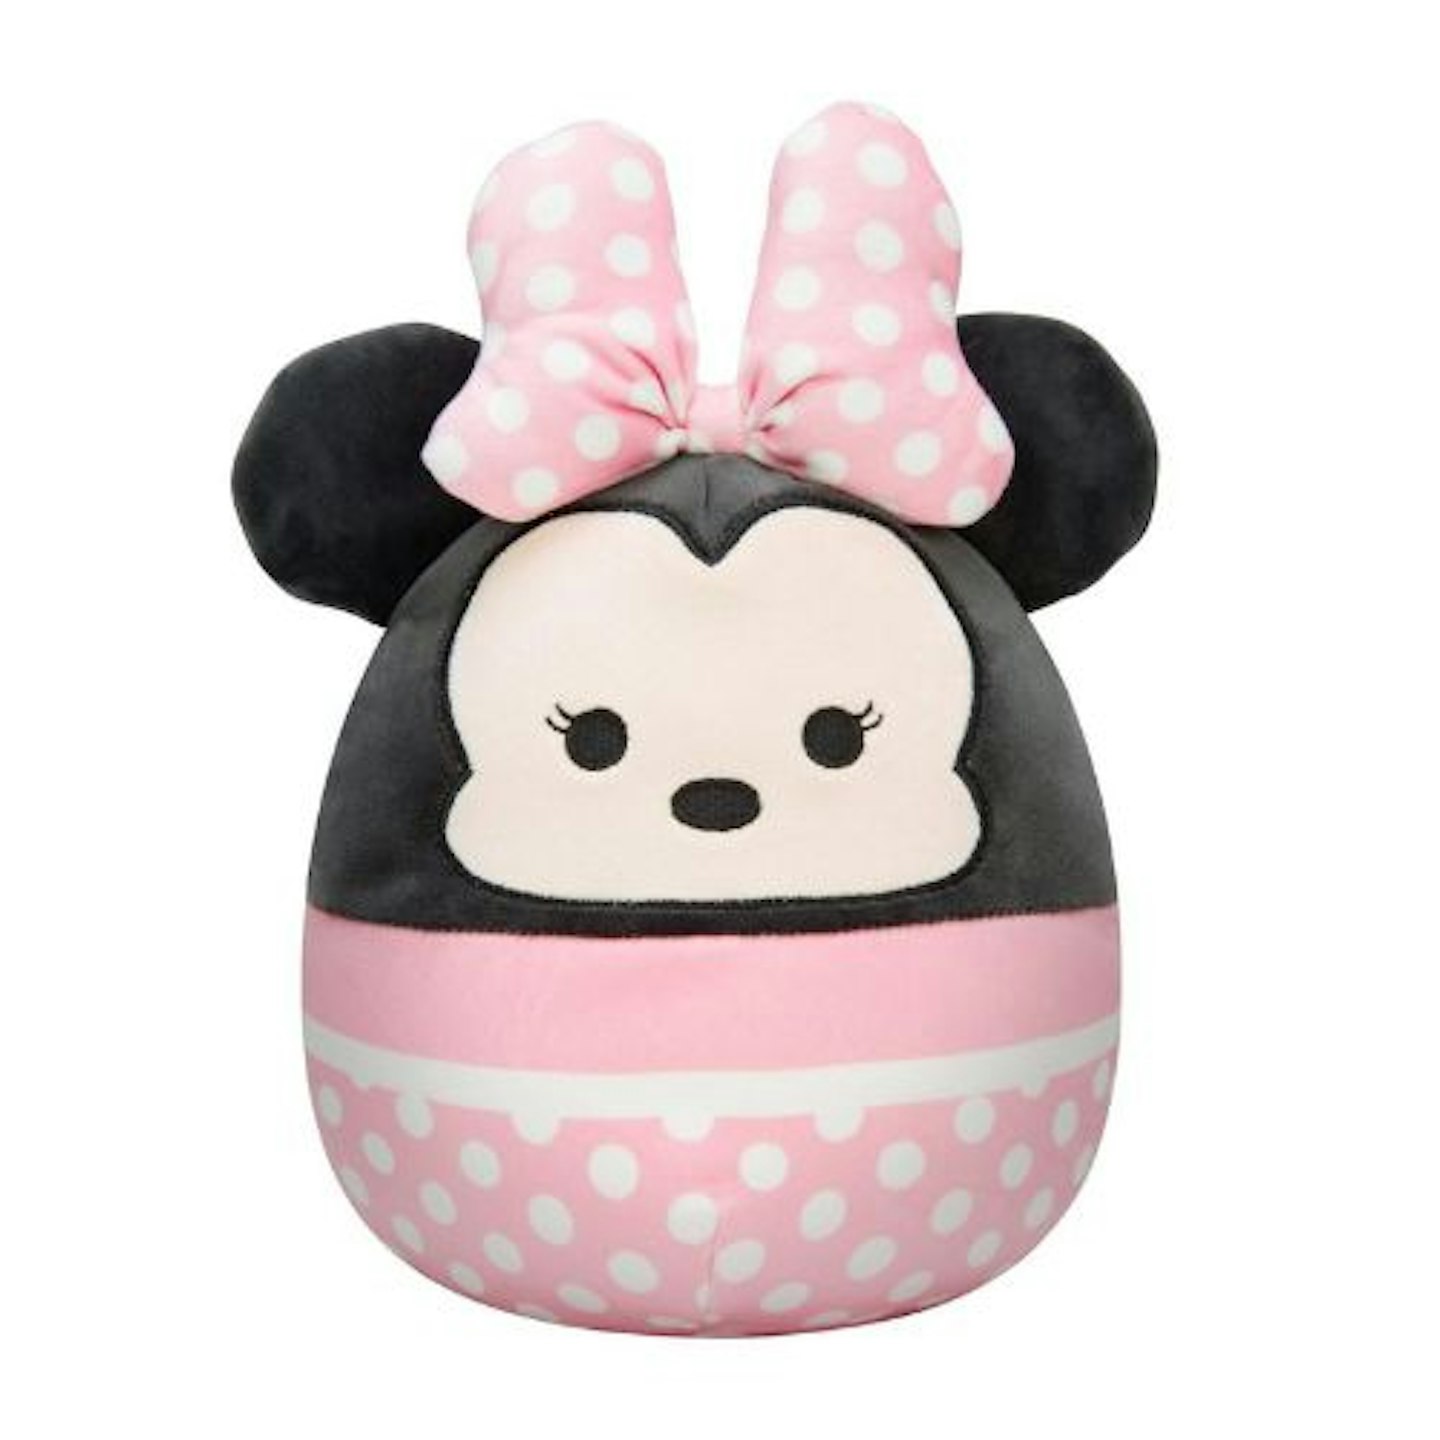 Best Minnie Mouse toy Squishmallows Disney -Minnie Mouse